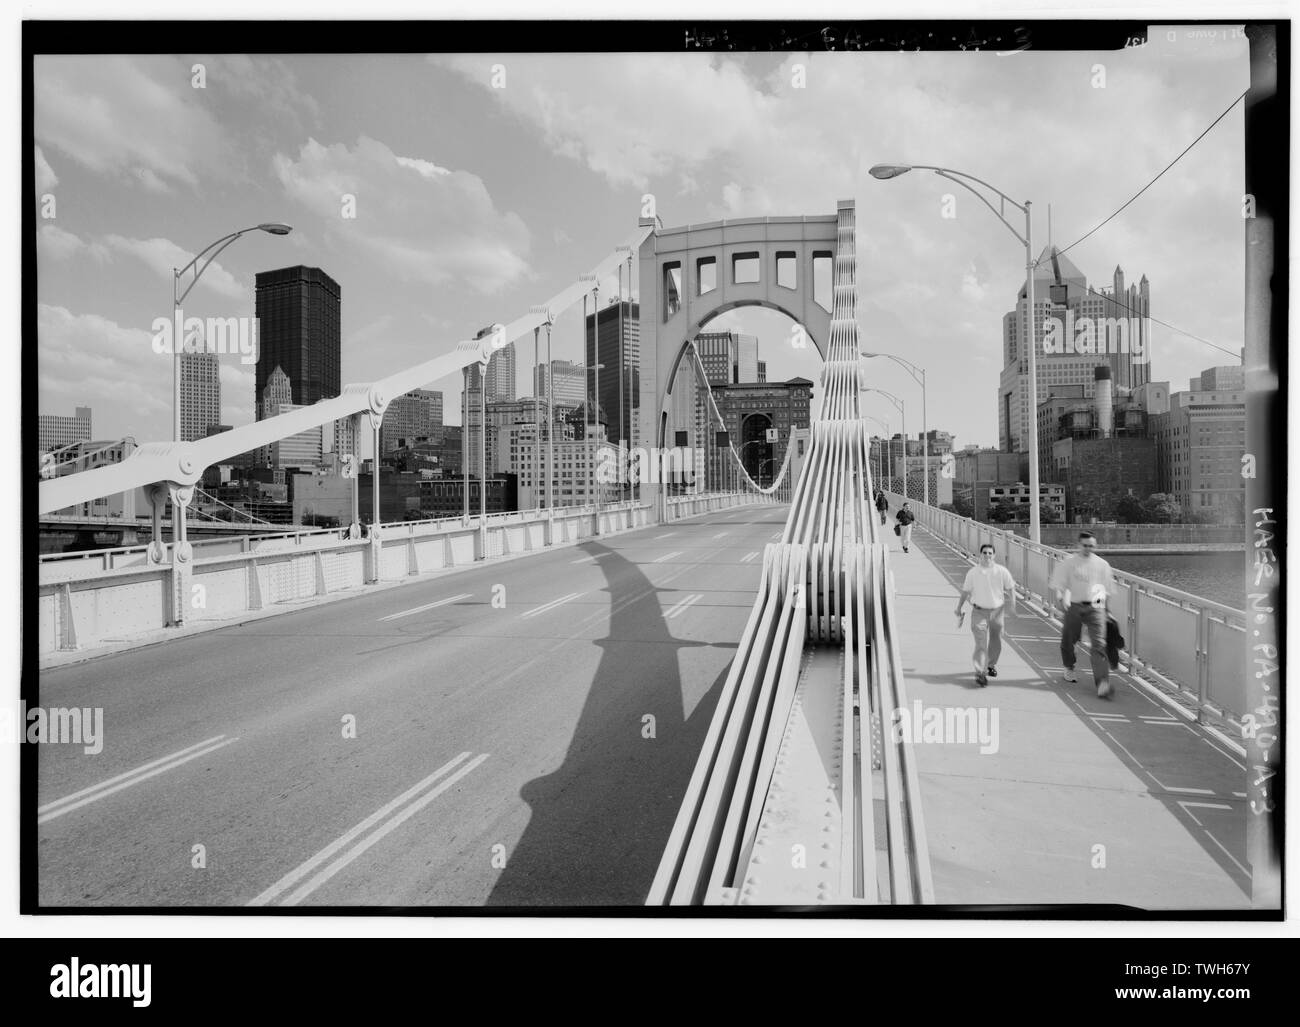 Roadway, eye-bars, and north tower. - Three Sisters Bridges, Sixth Street Bridge, Spanning Allegheny River at Sixth Street, Pittsburgh, Allegheny County, PA; Covell, Vernon R; Nutter, A D; Roush, Stanley L; Wilkerson, T J; American Bridge Company; Foundation Company; Allegheny County Department of Public Works; Brown, Norman F; Richardson, George S; Arnold, Bion J; Clemente, Roberto; DeLony, Eric N, project manager; Pennsylvania Department of Transportation, sponsor; Pennsylvania Historical and Museum Commission, sponsor; Lowe, Jet, photographer; Berg, David C, photographer; Gordon, Susan H, d Stock Photo